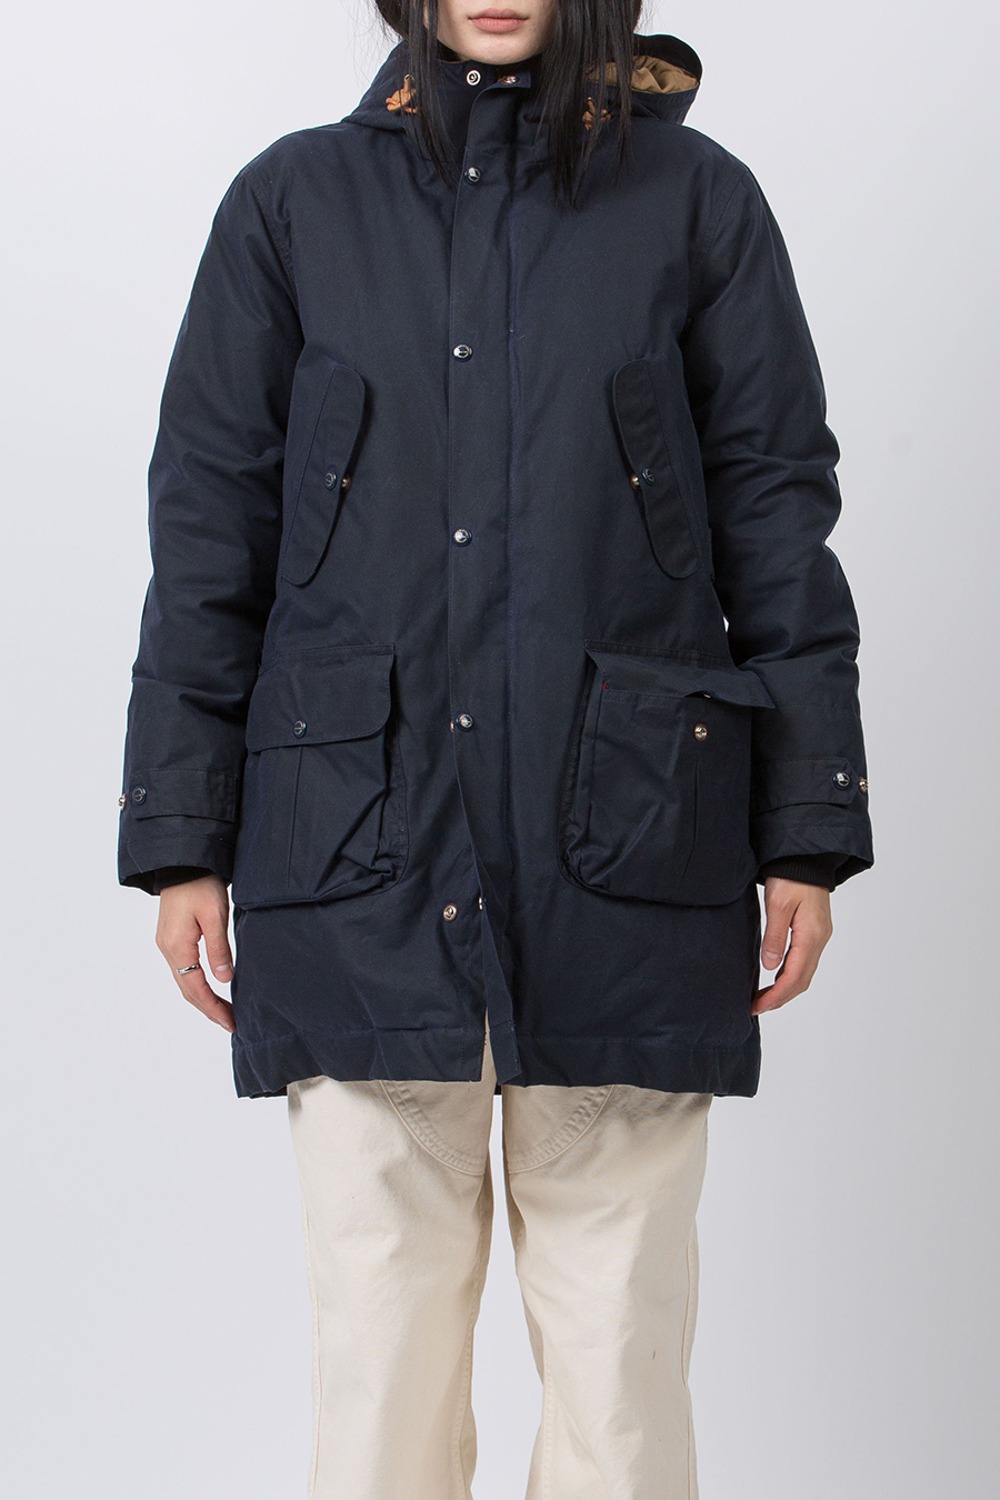 Heavy Wax Goose Down Parka Navy Ladies by ITALY(8002W-BX)